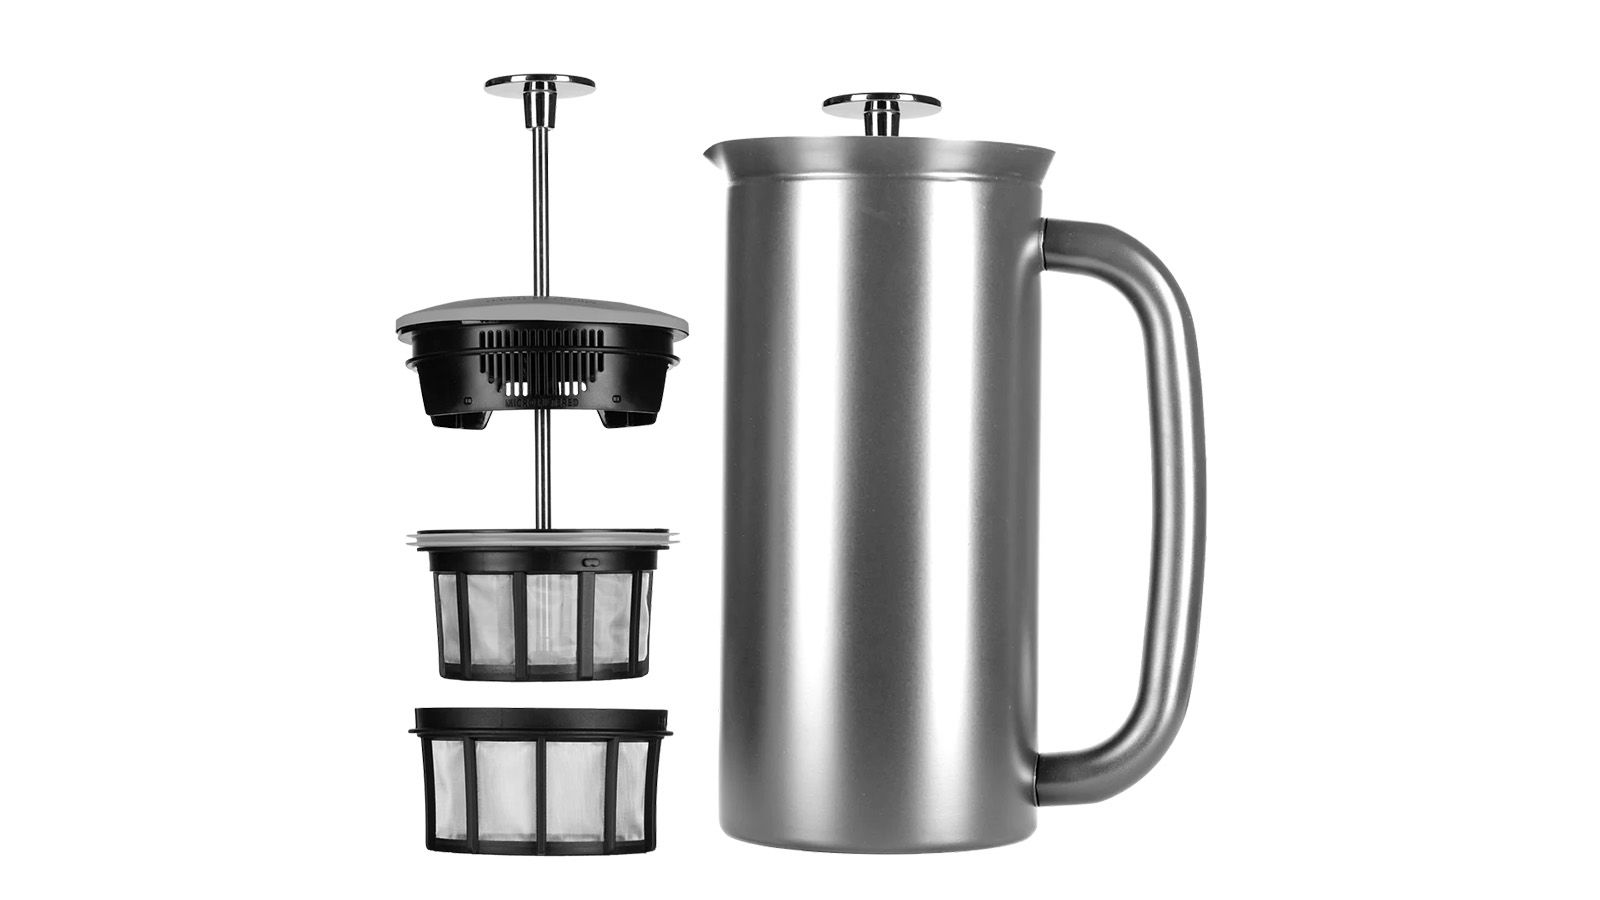 Aerolatte Milk Frother Review 2019 - Best Gadget for Coffee Lovers